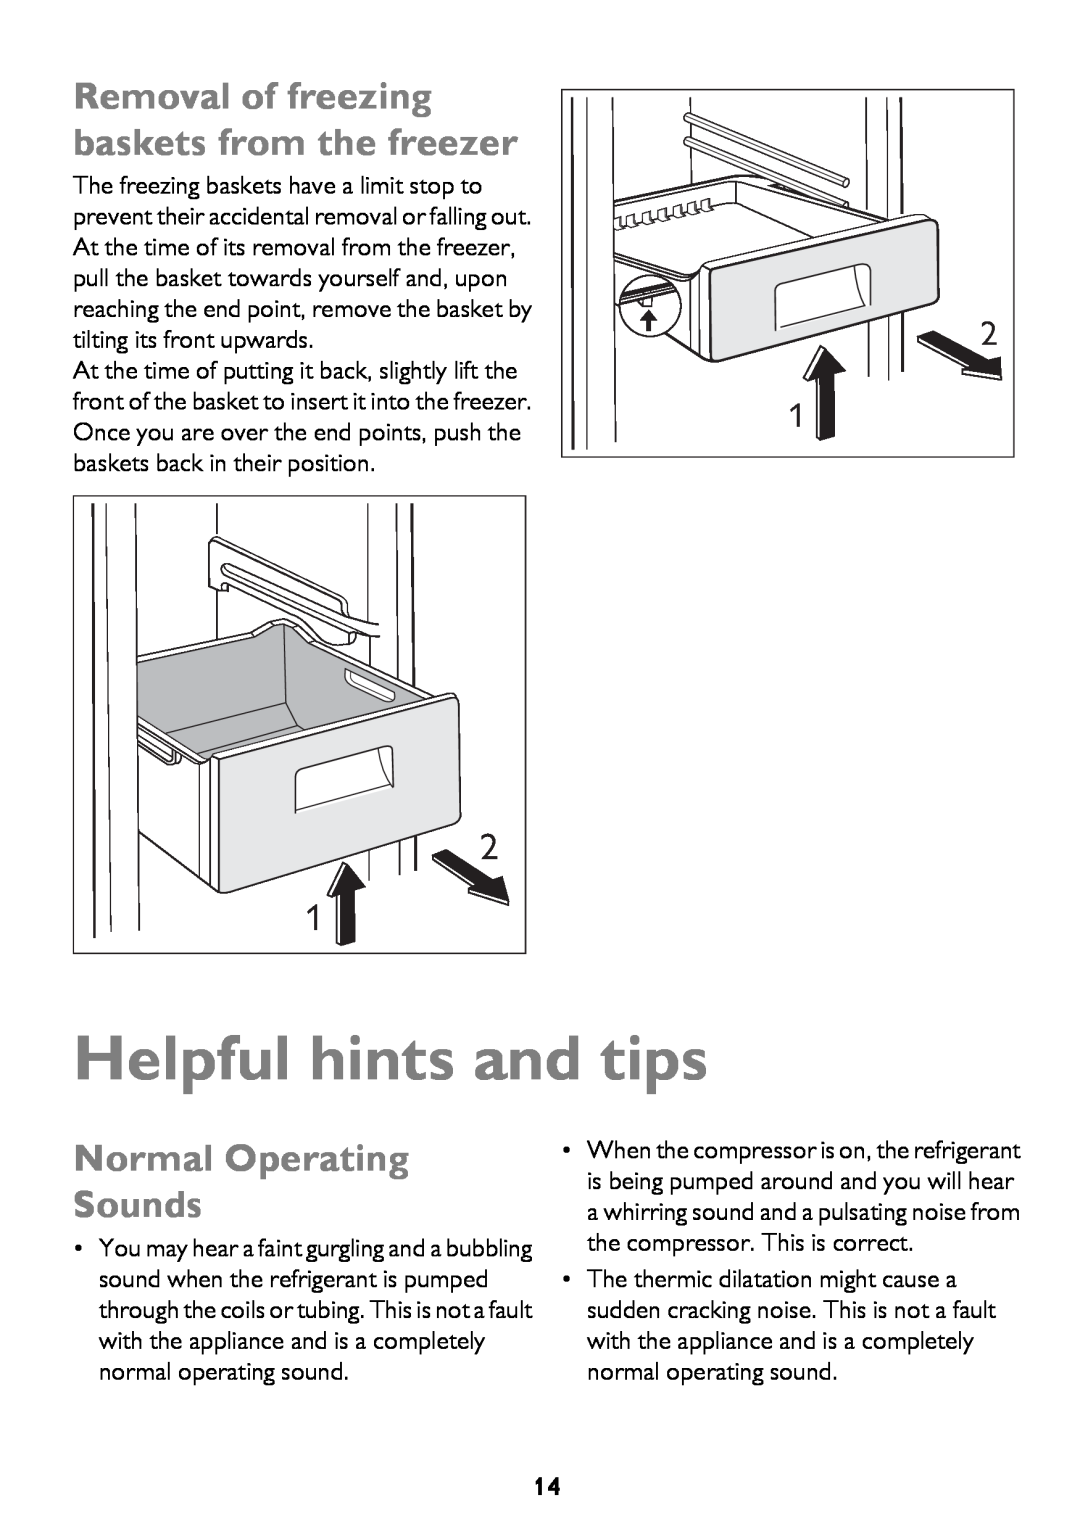 John Lewis JLFFW2012 Helpful hints and tips, Removal of freezing baskets from the freezer, Normal Operating Sounds 